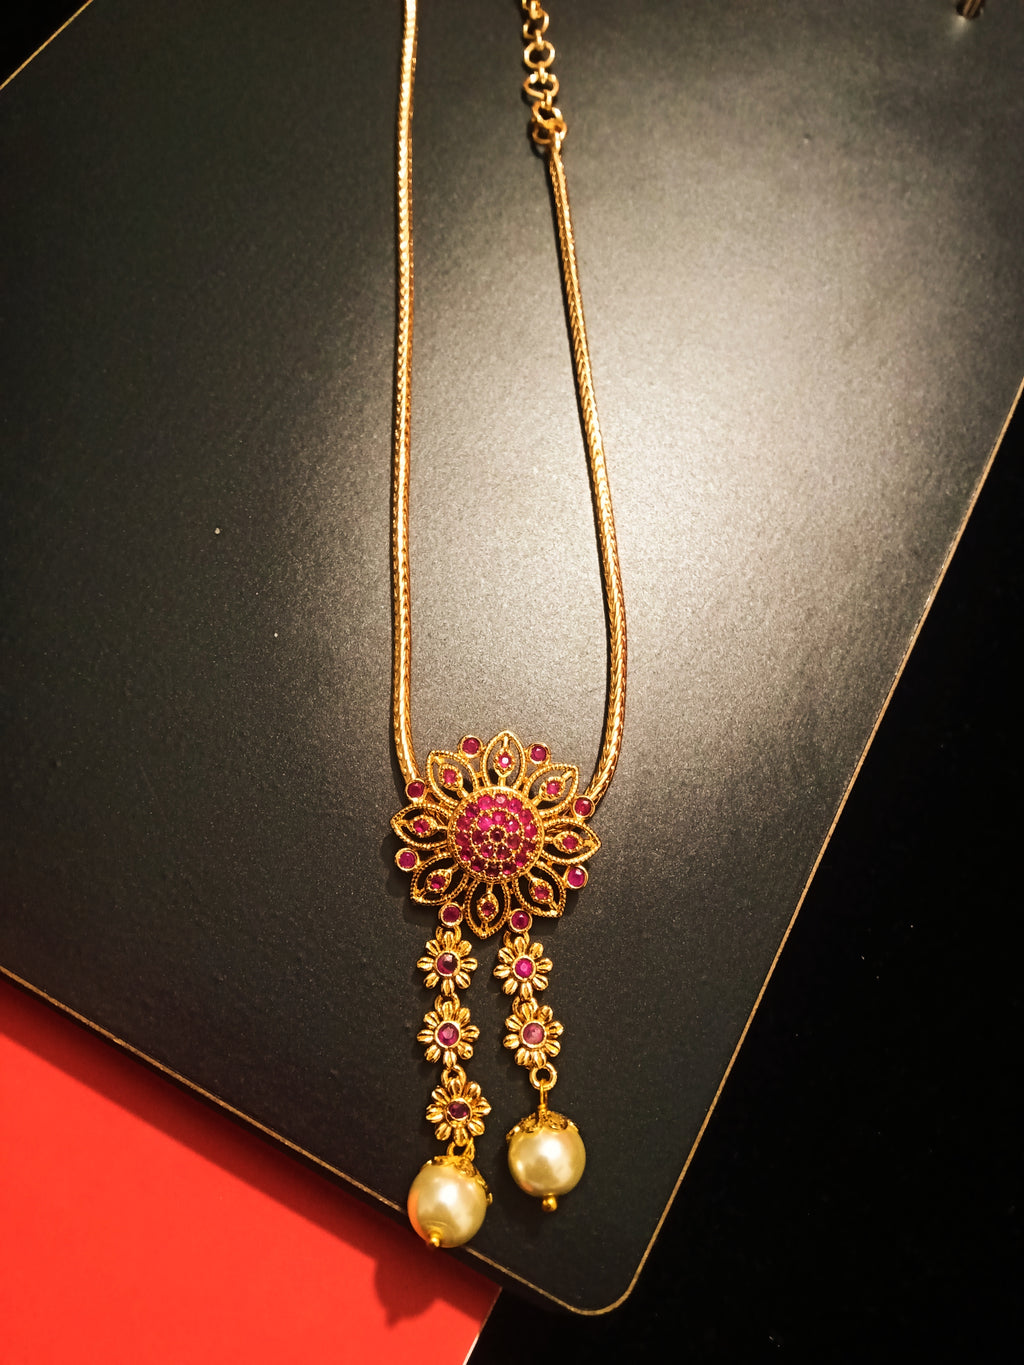 N0188_Elegant Micro Gold plated Necklace with delicate  flowery pattern design studded with Precious pink ruby stones with a touch of pearls.